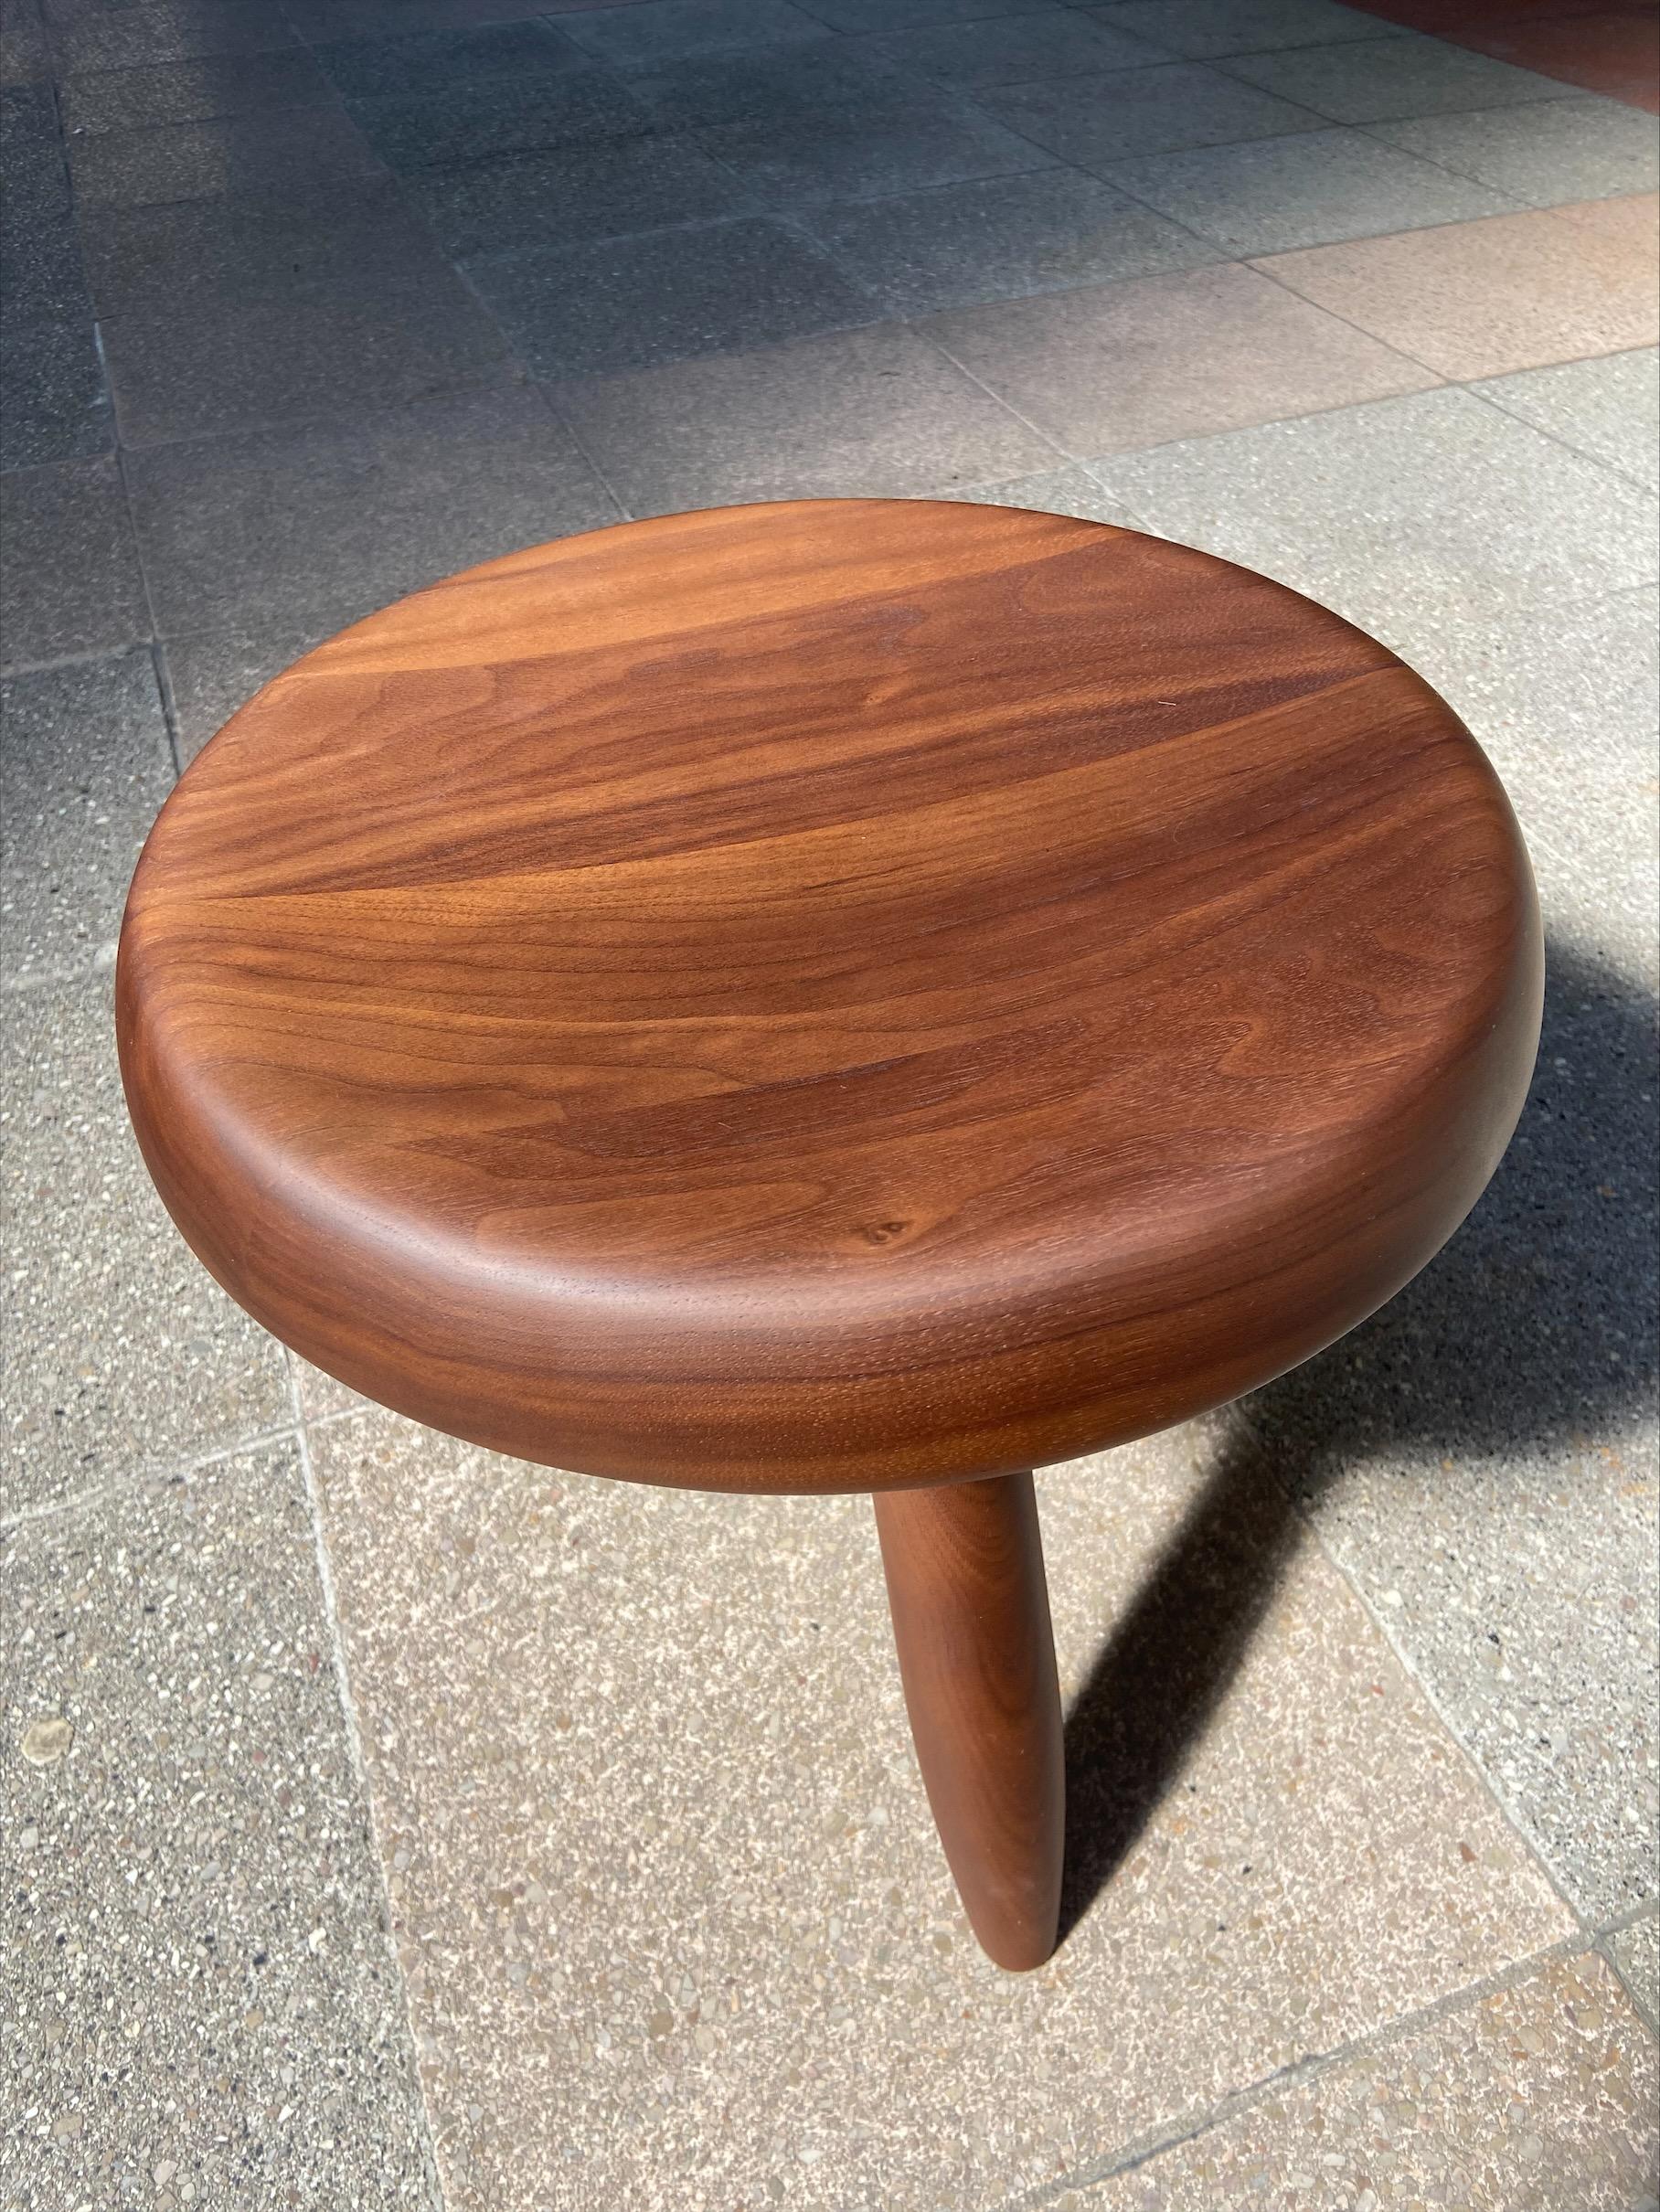 Other Low Shepherd Stool, Charlotte Perriand Walnut, New Cassina Edition